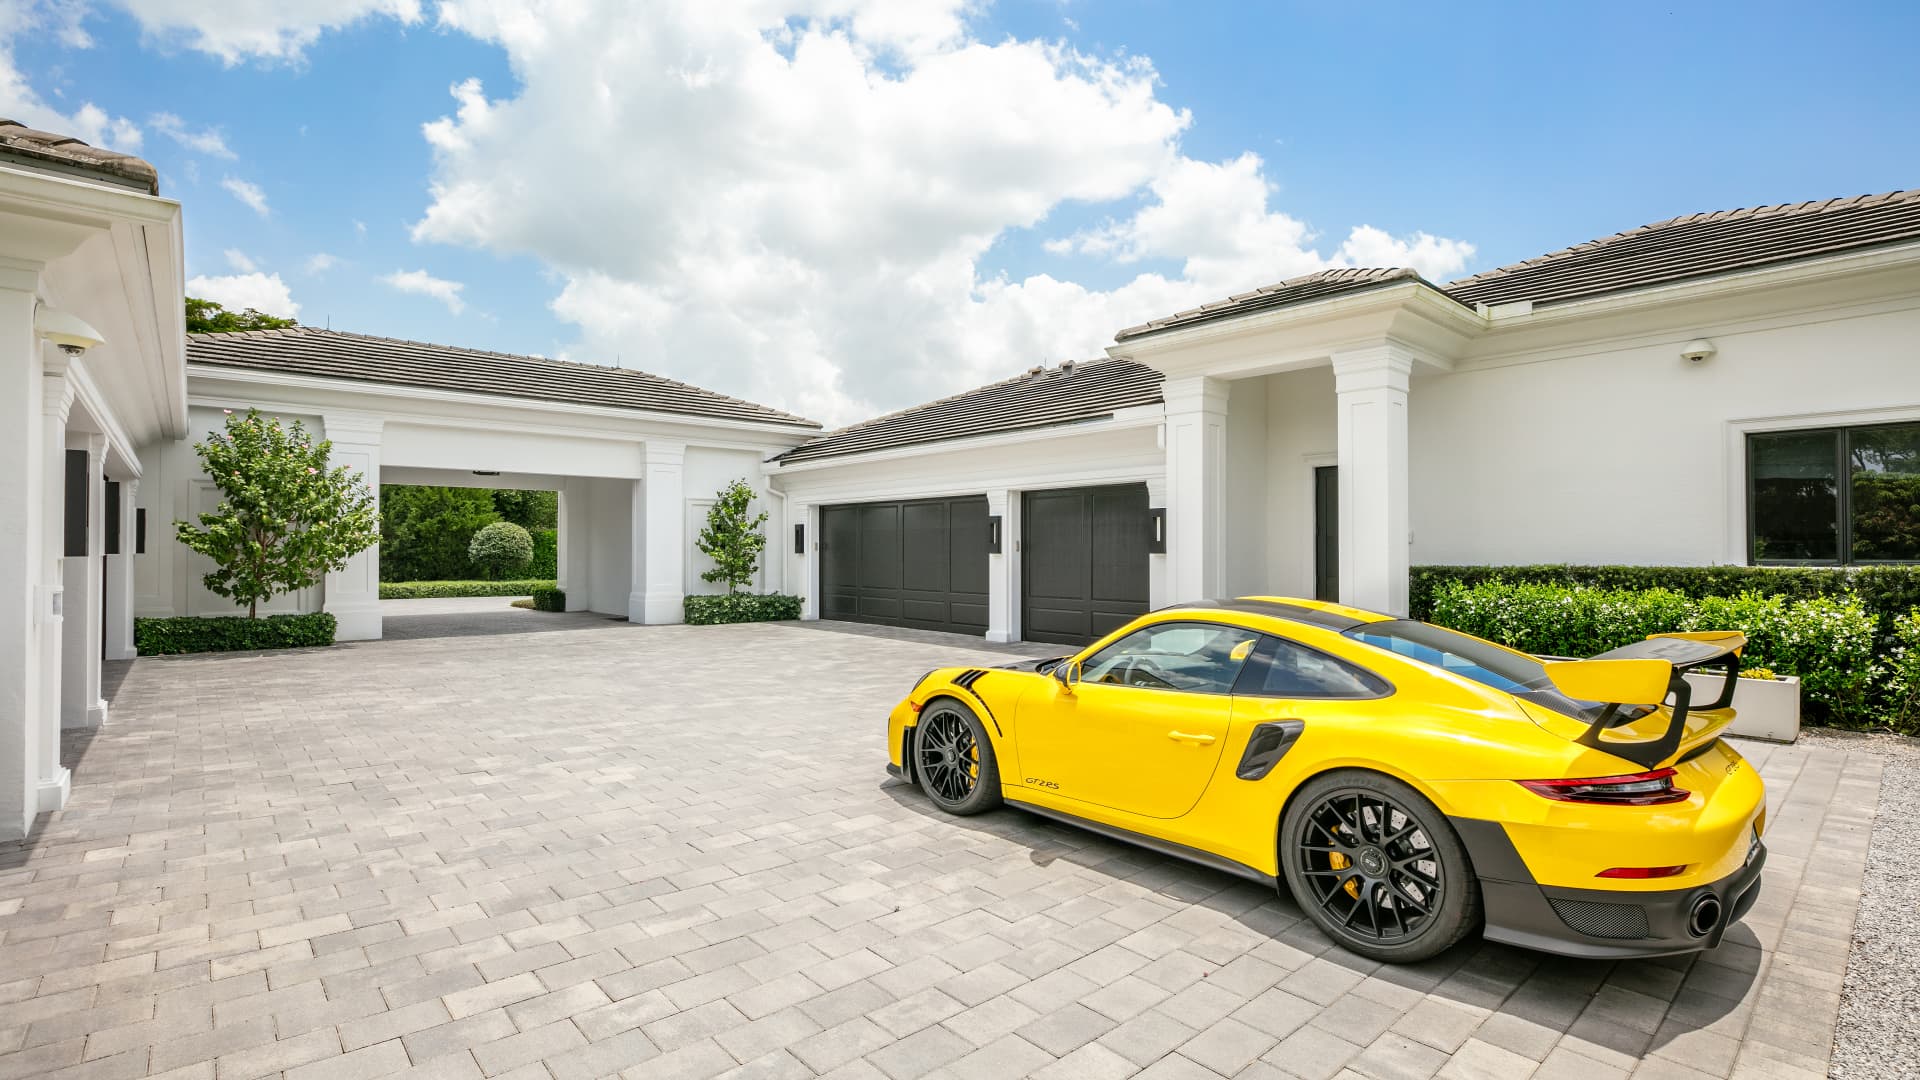 The home has air-conditioned parking for nine cars.